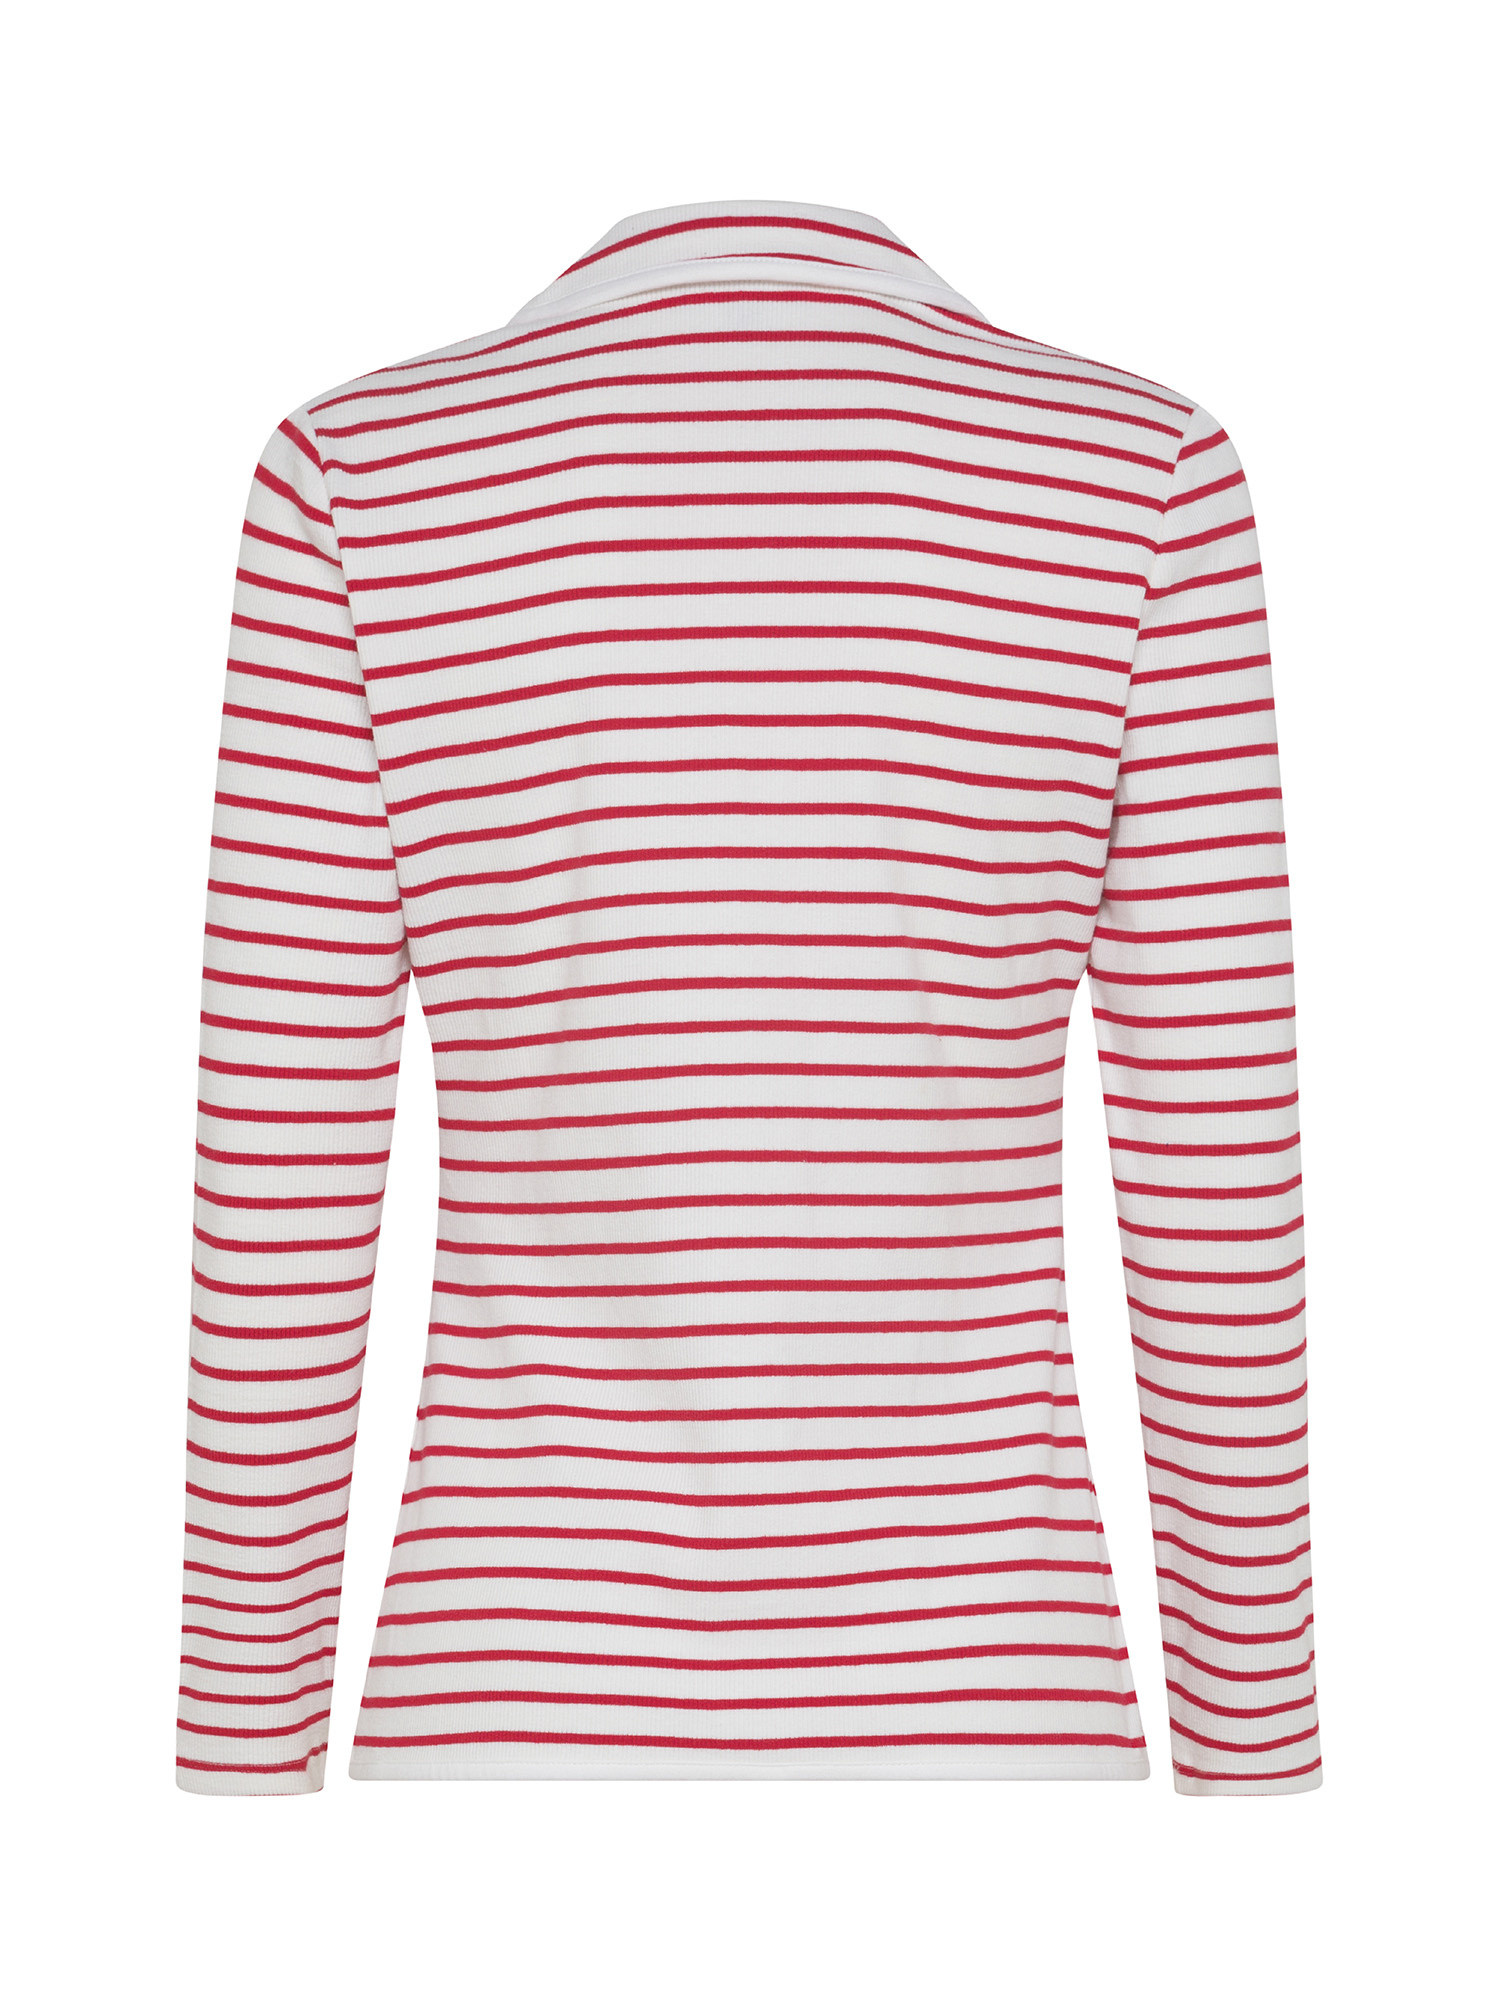 Koan - Ribbed jacket with stripes, Red, large image number 1